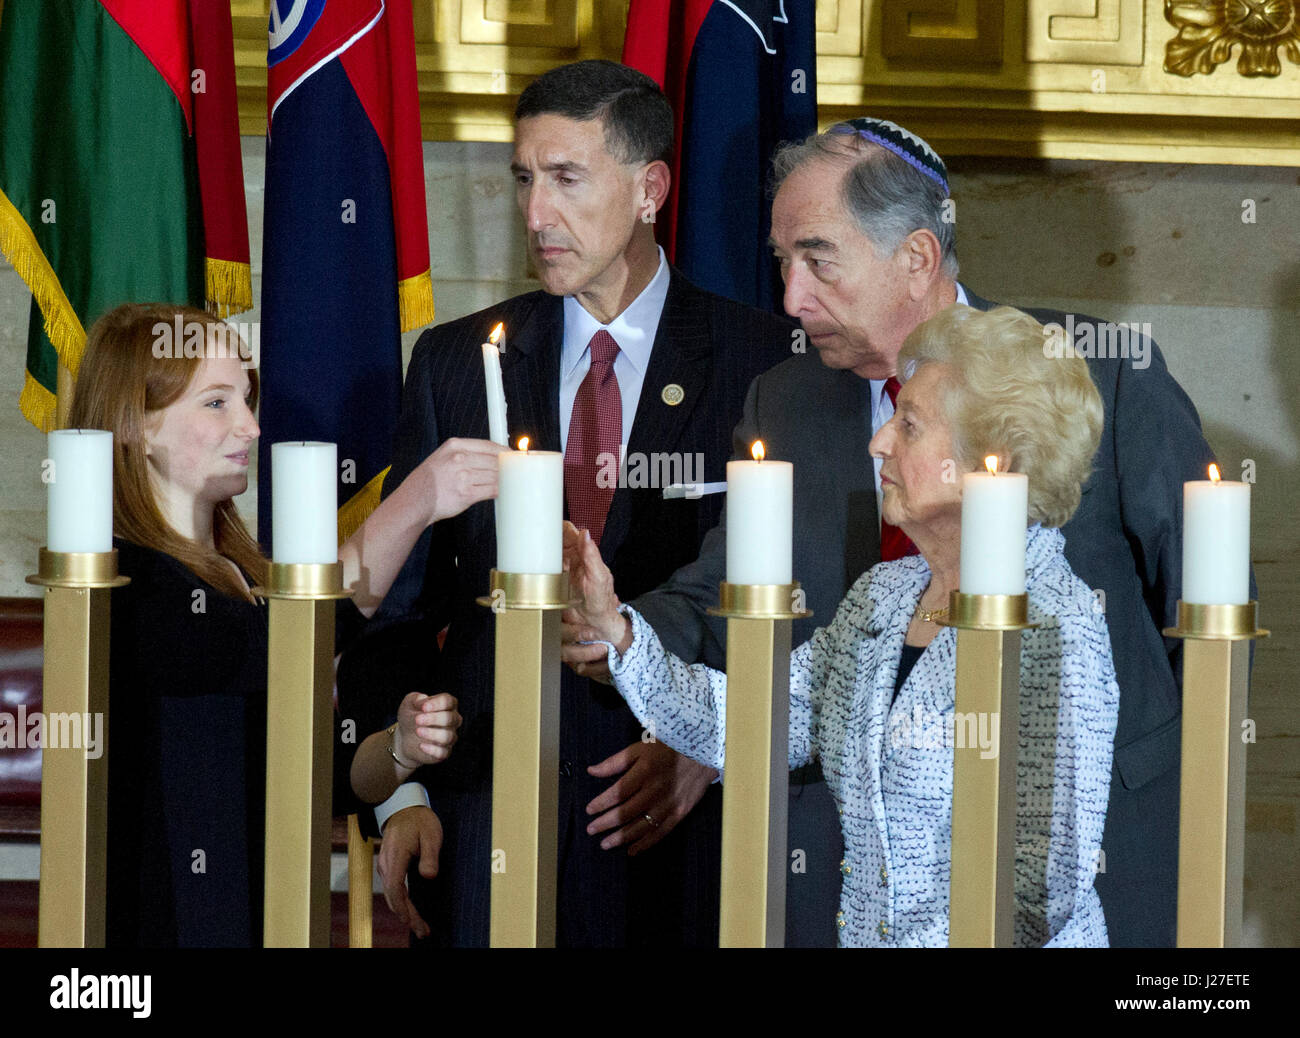 Washington, USA. 25th Apr, 2017. Participants in the candle lighting ceremony, from left to right: Shira Godin, a sophomore at the Charles E. Smith Jewish Day School in Rockville, Maryland; United States Representative David Kustoff (Republican of Tennessee); Emanuel Mandel, Holocaust Survivor; and Irene Weiss, Holocaust Survivor; following US President Donald J. Trump's remarks at the National Commemoration of the Days of Remembrance ceremony in the Rotunda of the US Capitol in Washington, DC on Tuesday, April 25, 2017. Credit: MediaPunch Inc/Alamy Live News Stock Photo